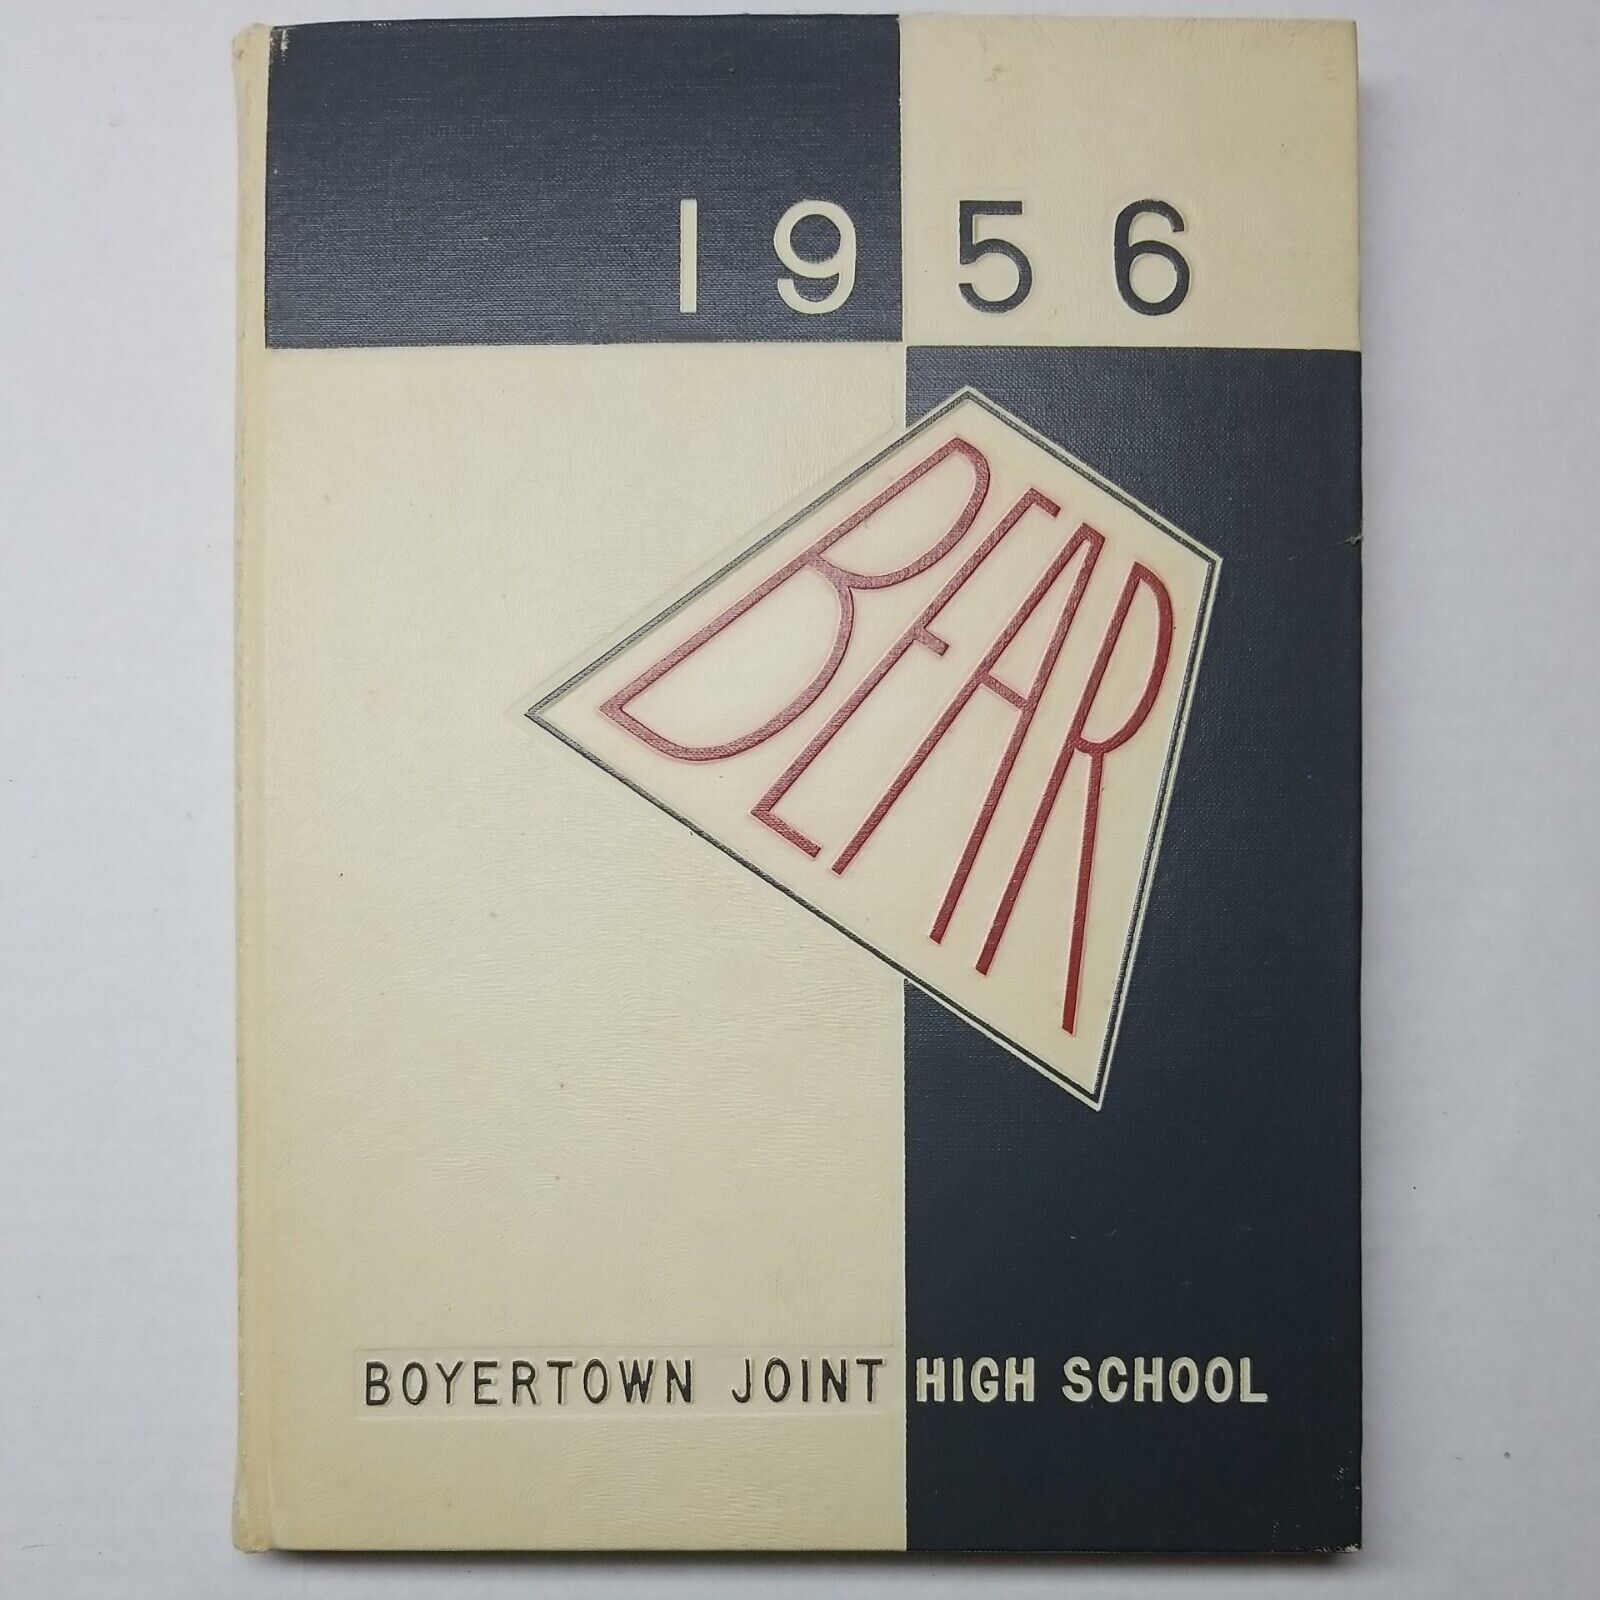 Bear Yearbook 1956 Boyerstown Joint High School BJHS PA Pennsylvania Annual